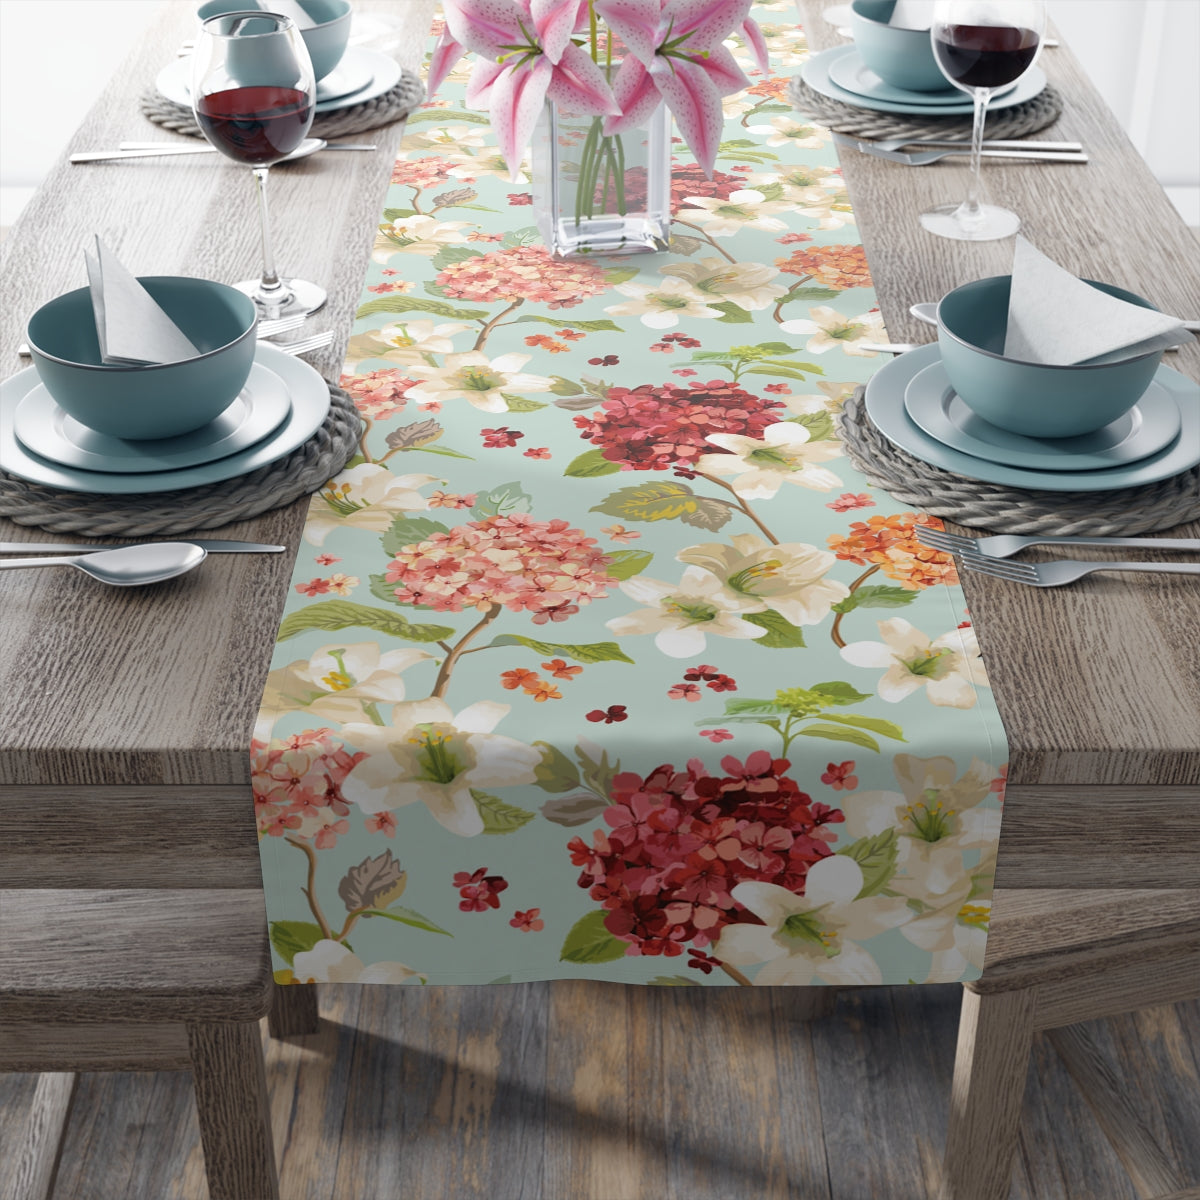 Autumn Hortensia and Lily Flowers Table Runner